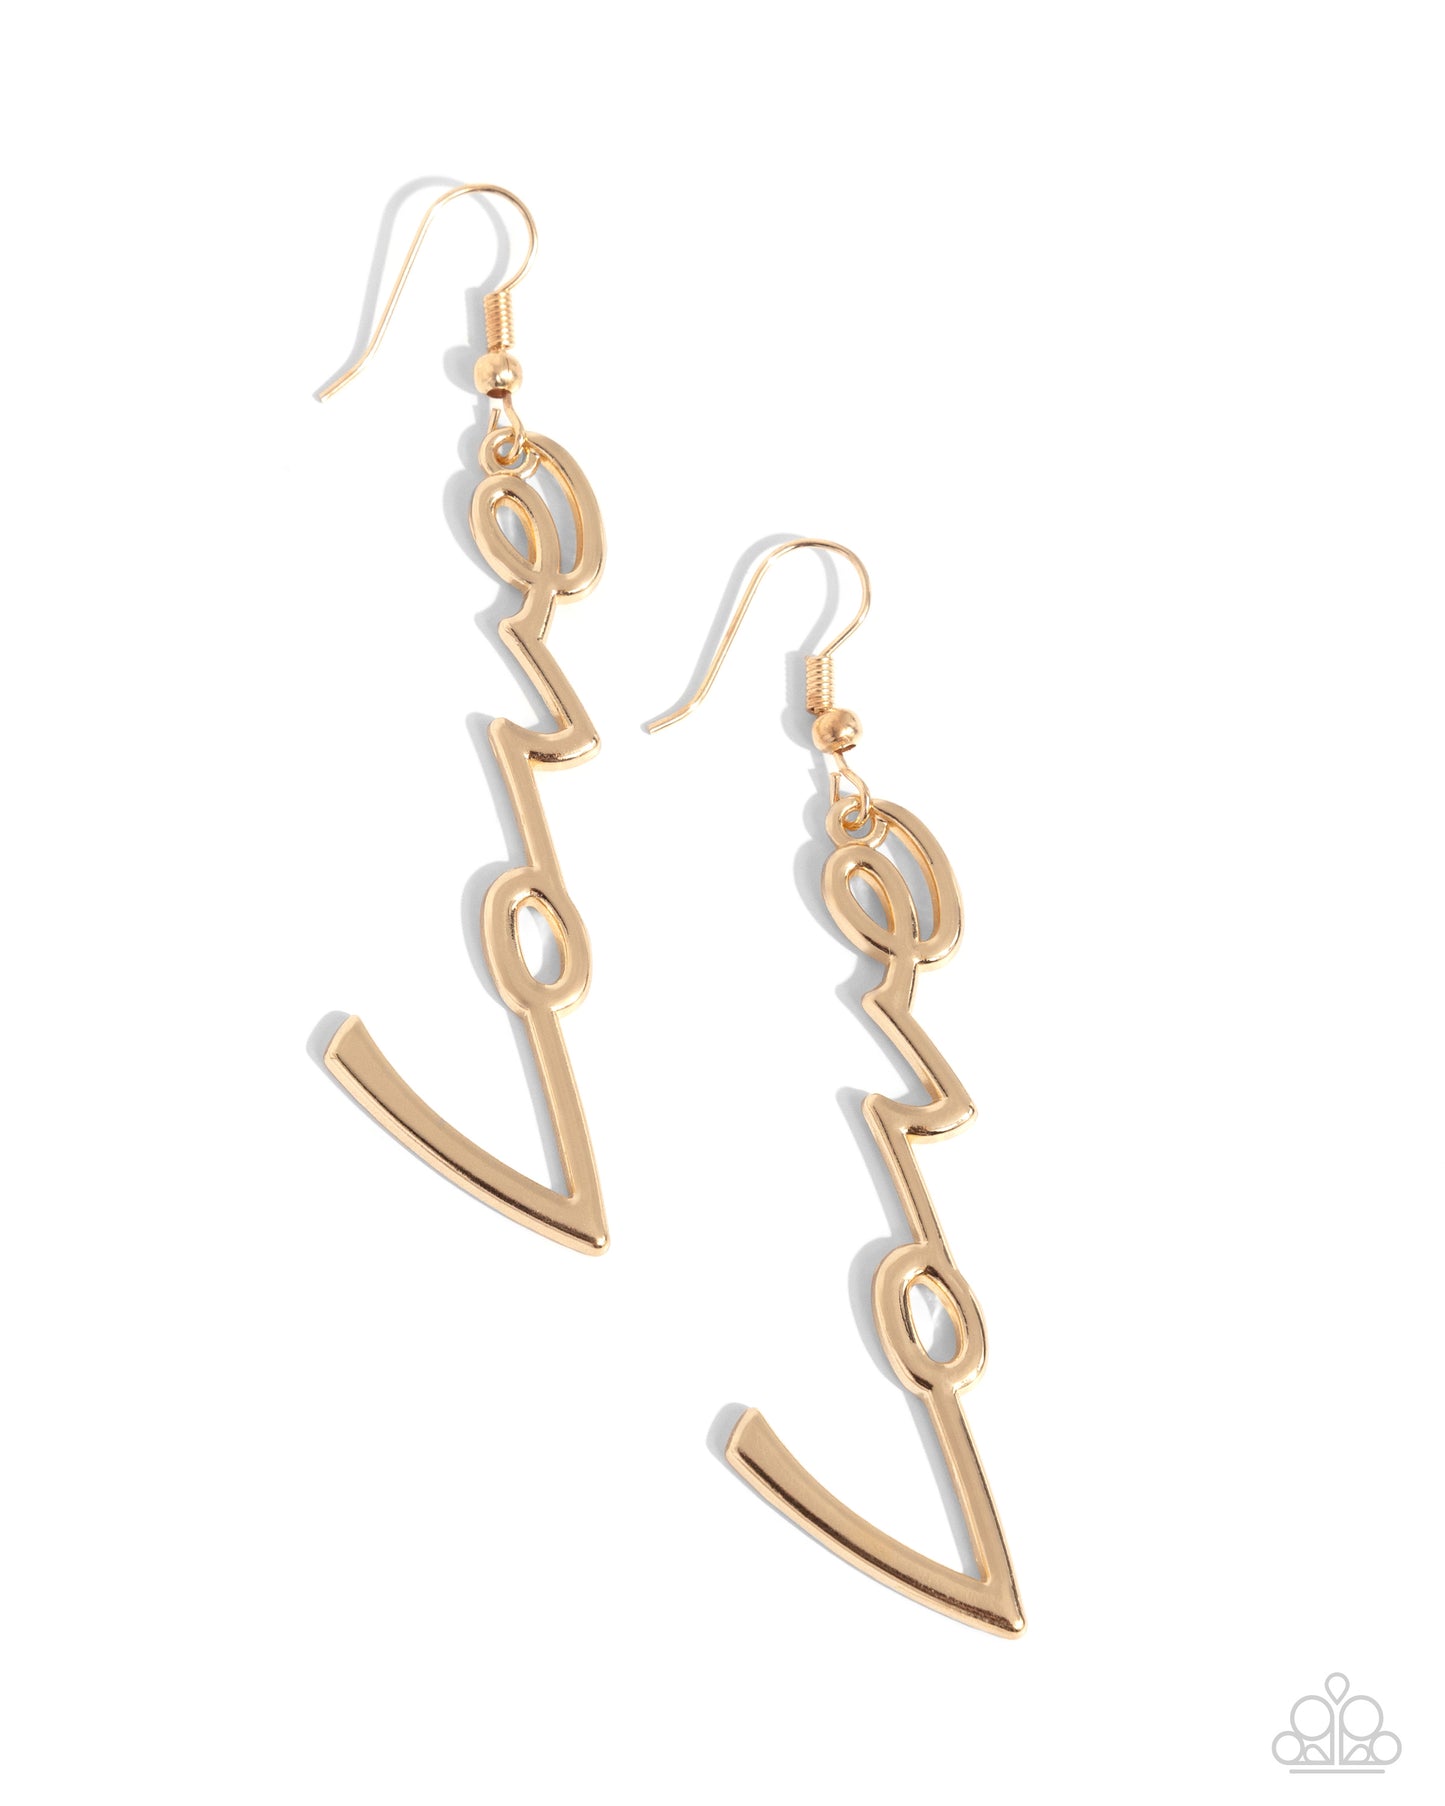 Light-Catching Letters - Gold Earring